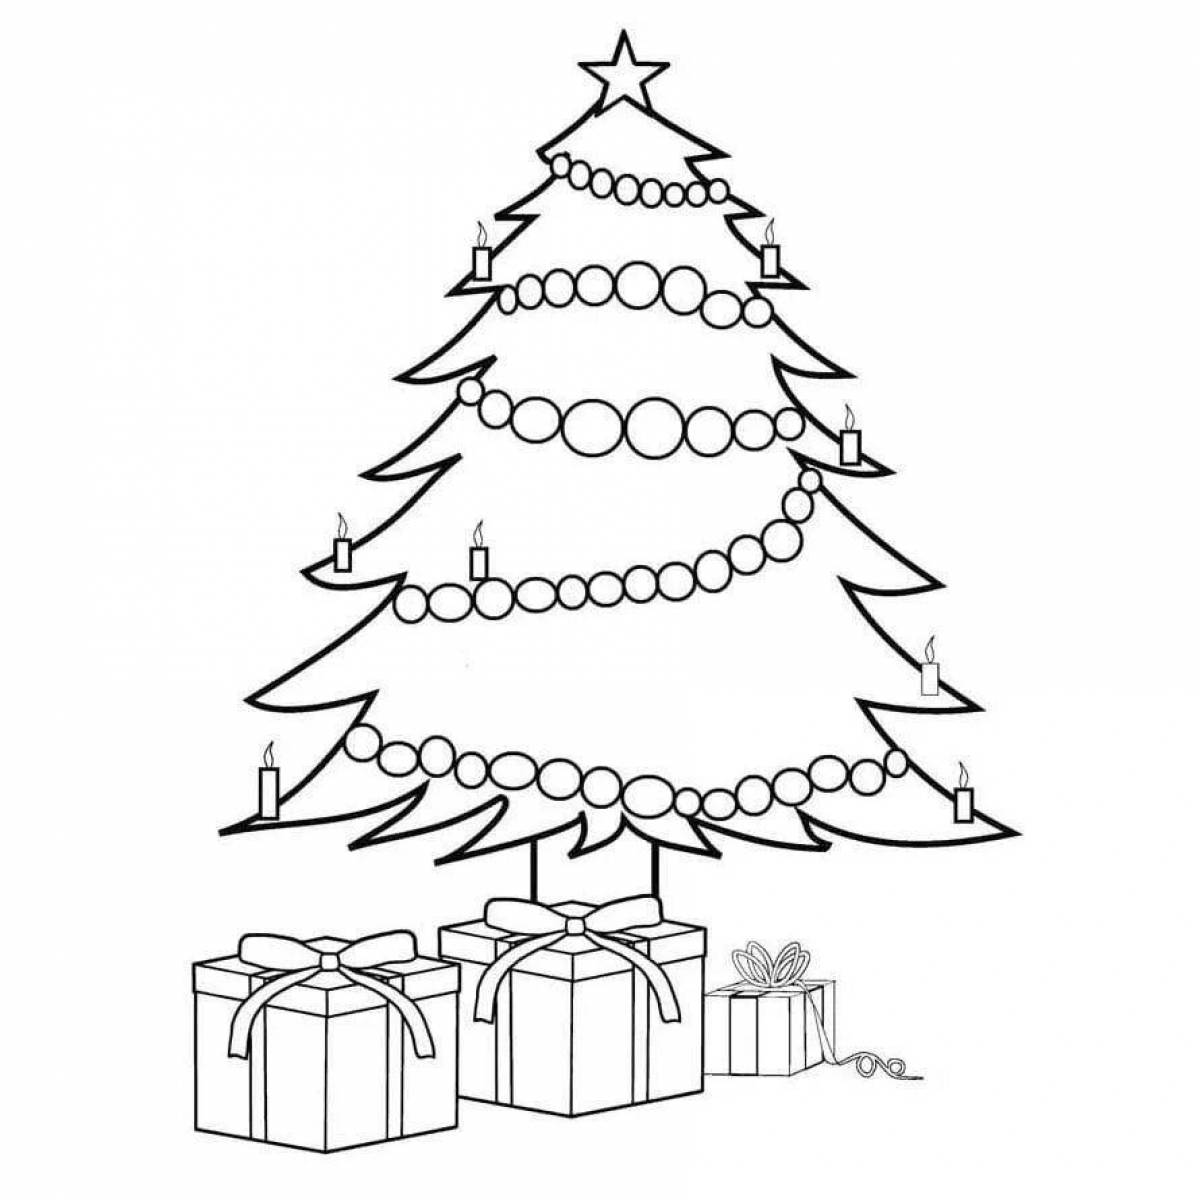 Blooming Christmas tree coloring page